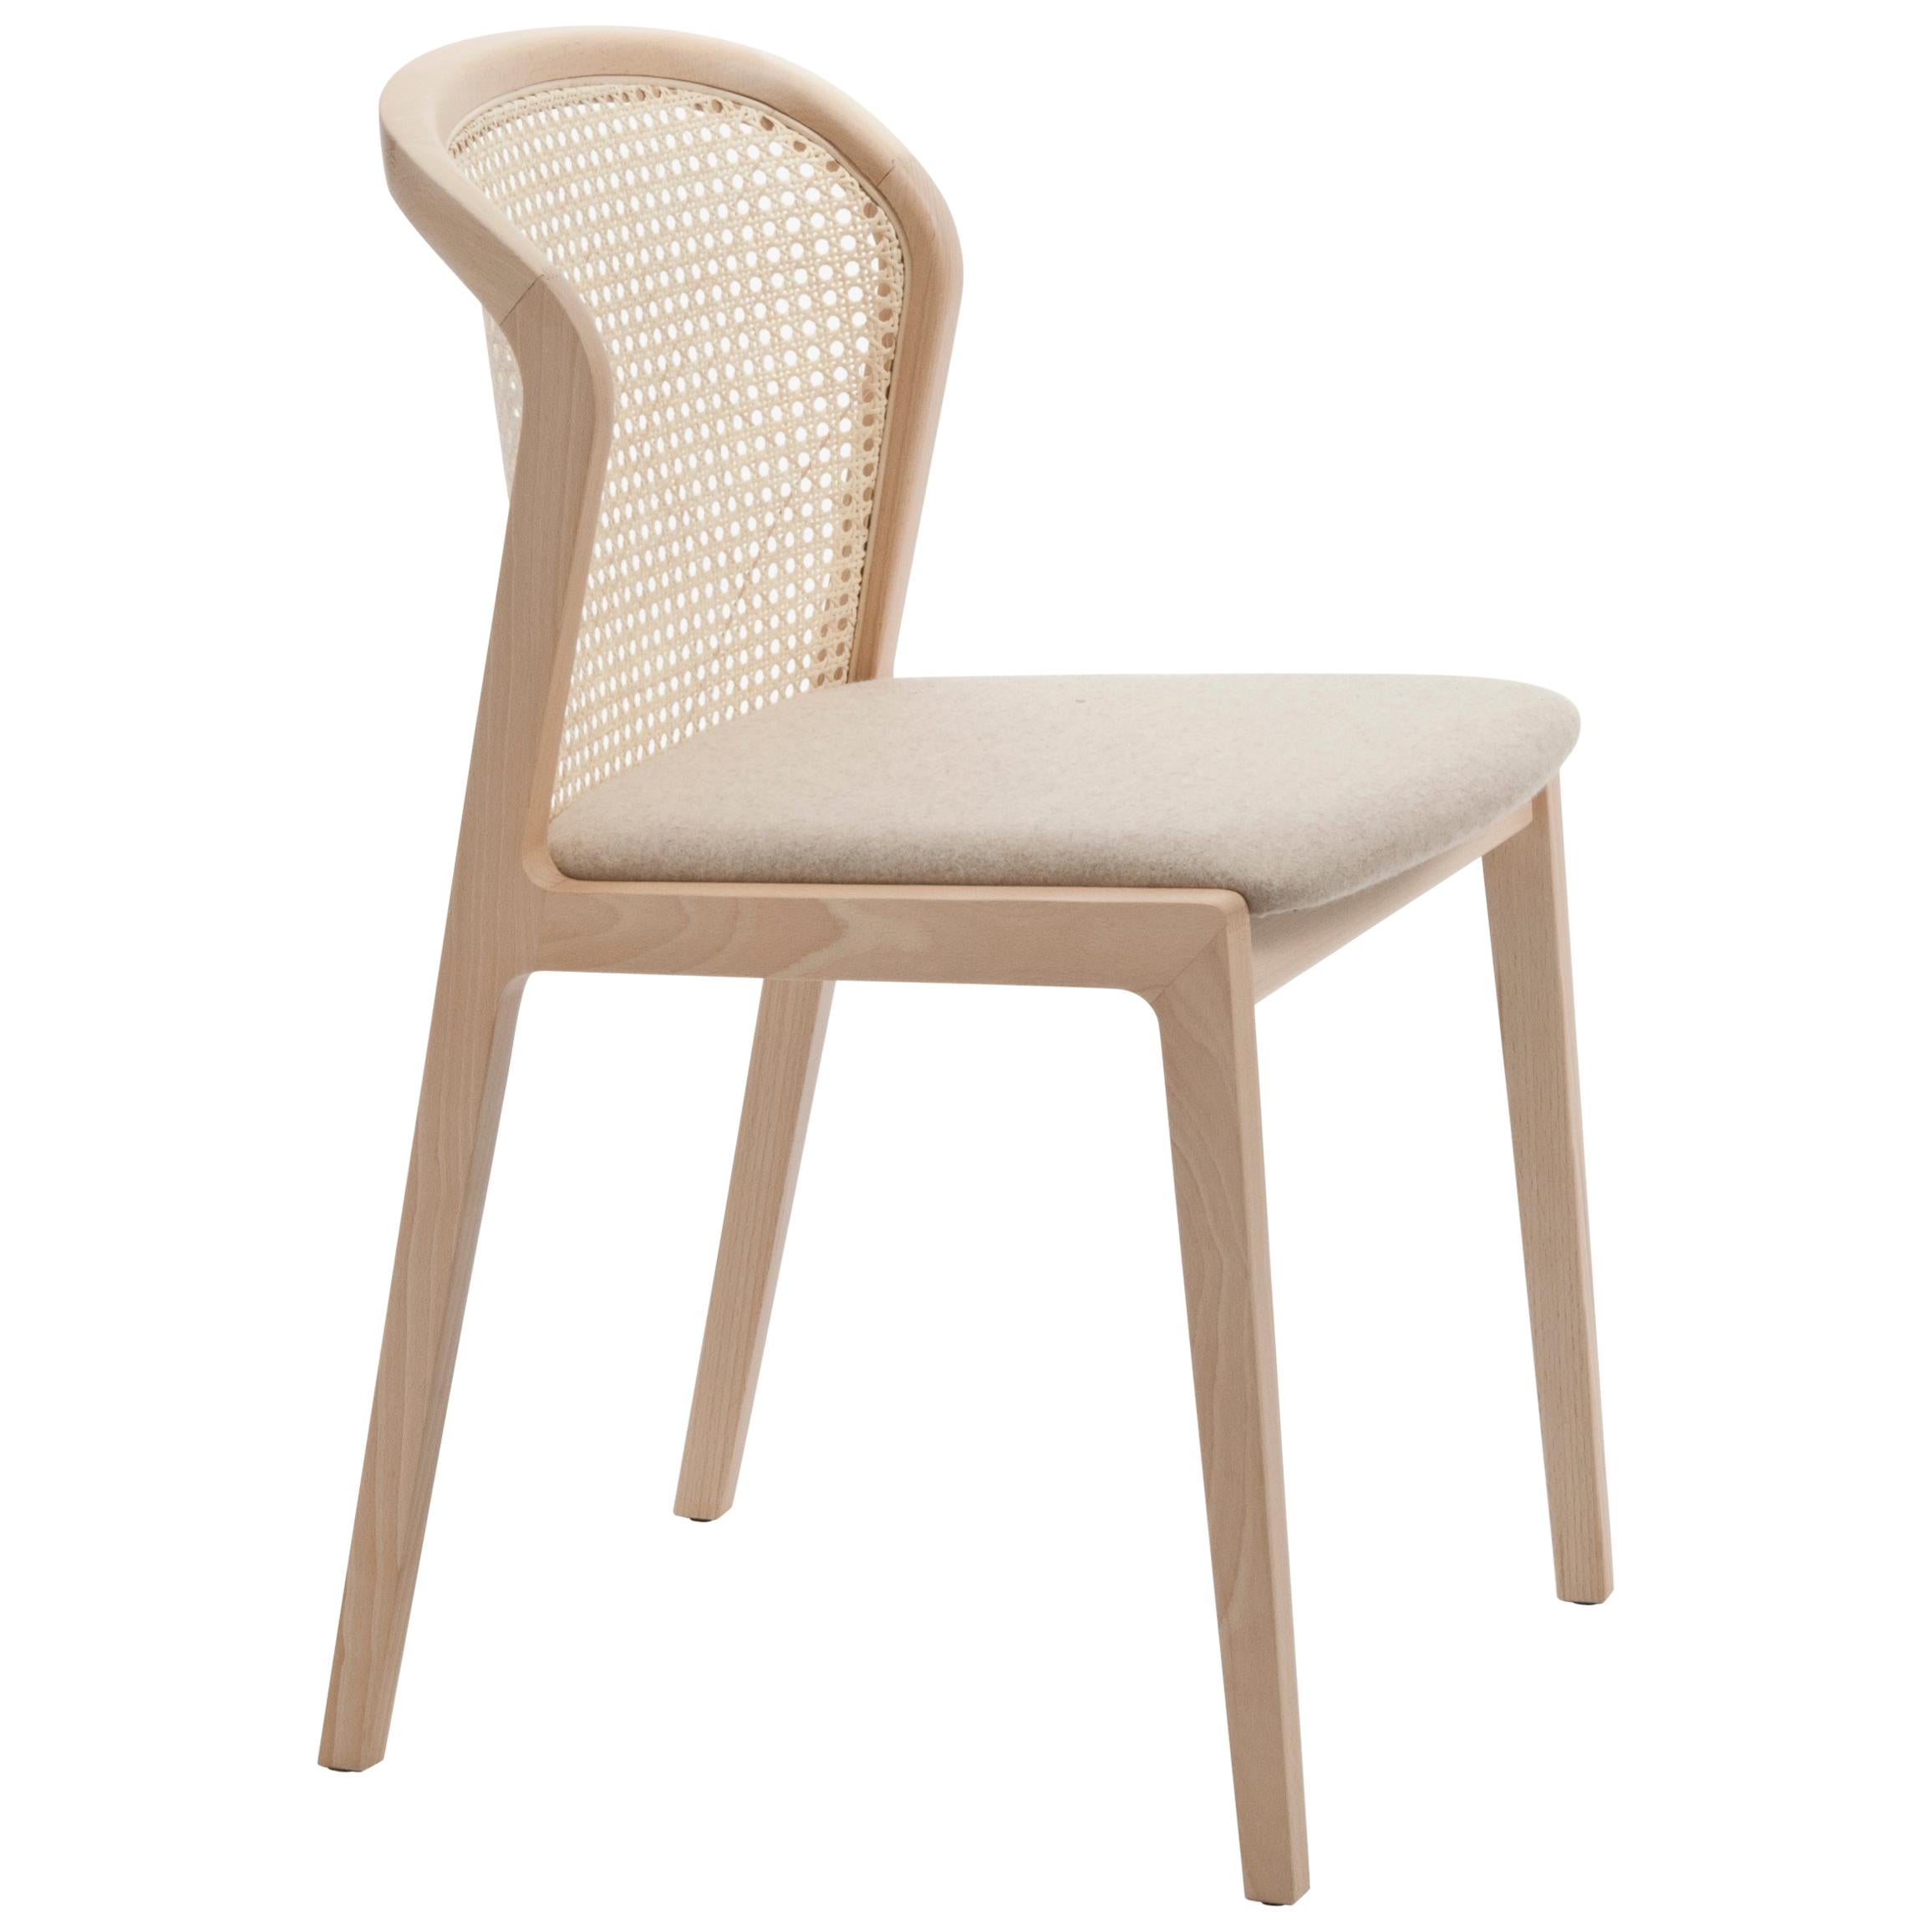 Machine-Made Vienna Chair by Colé, Modern Design in Wood and Straw, Azure Upholstered Seat For Sale